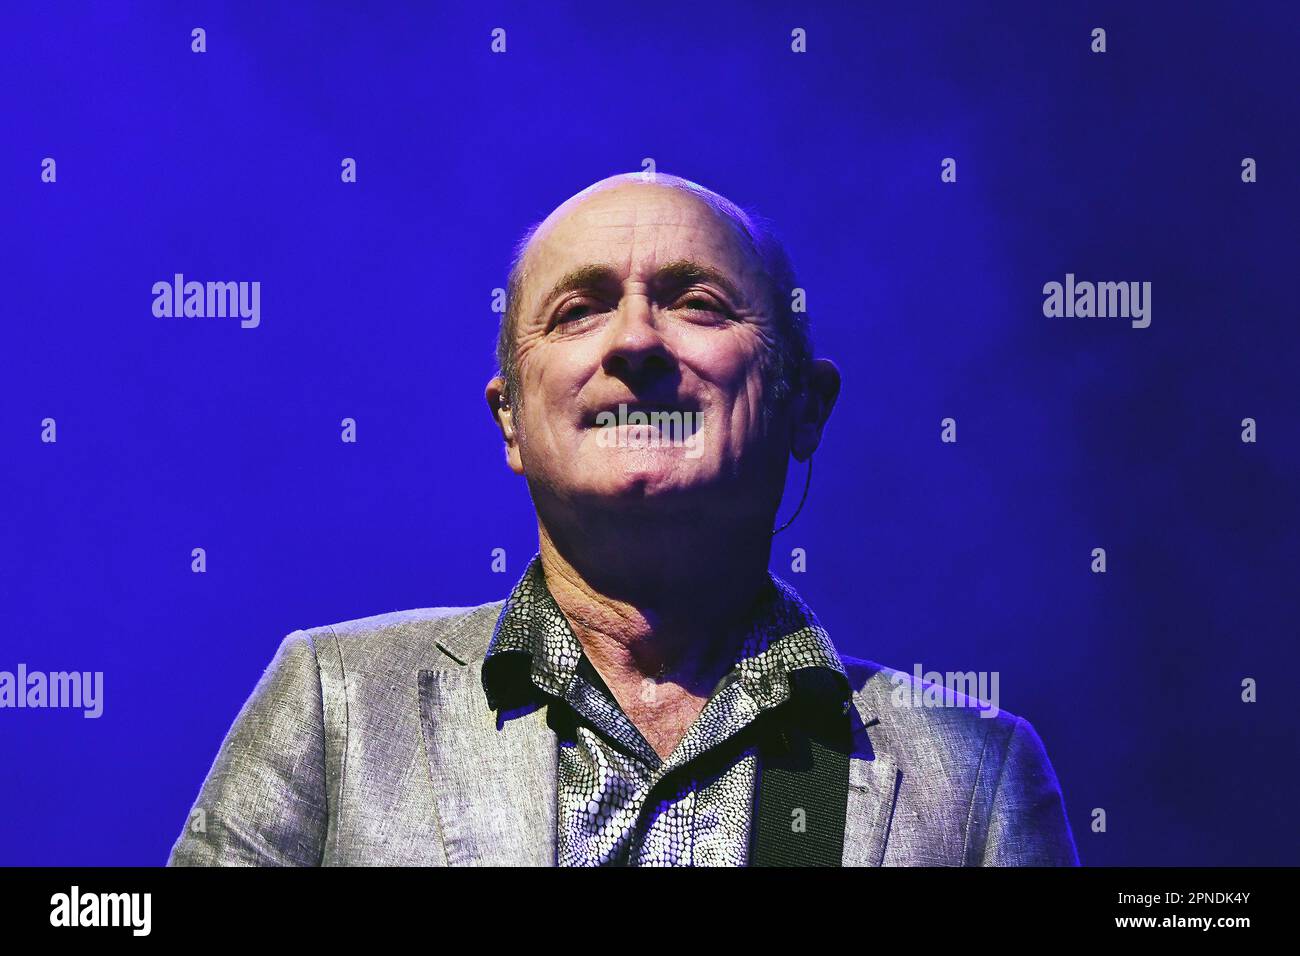 Rio de Janeiro, Brazil, April 14, 2023. Vocalist Dave Faulkner of the Australian alternative rock band Hoodoo Gurus, during a show at Qualistage in th Stock Photo